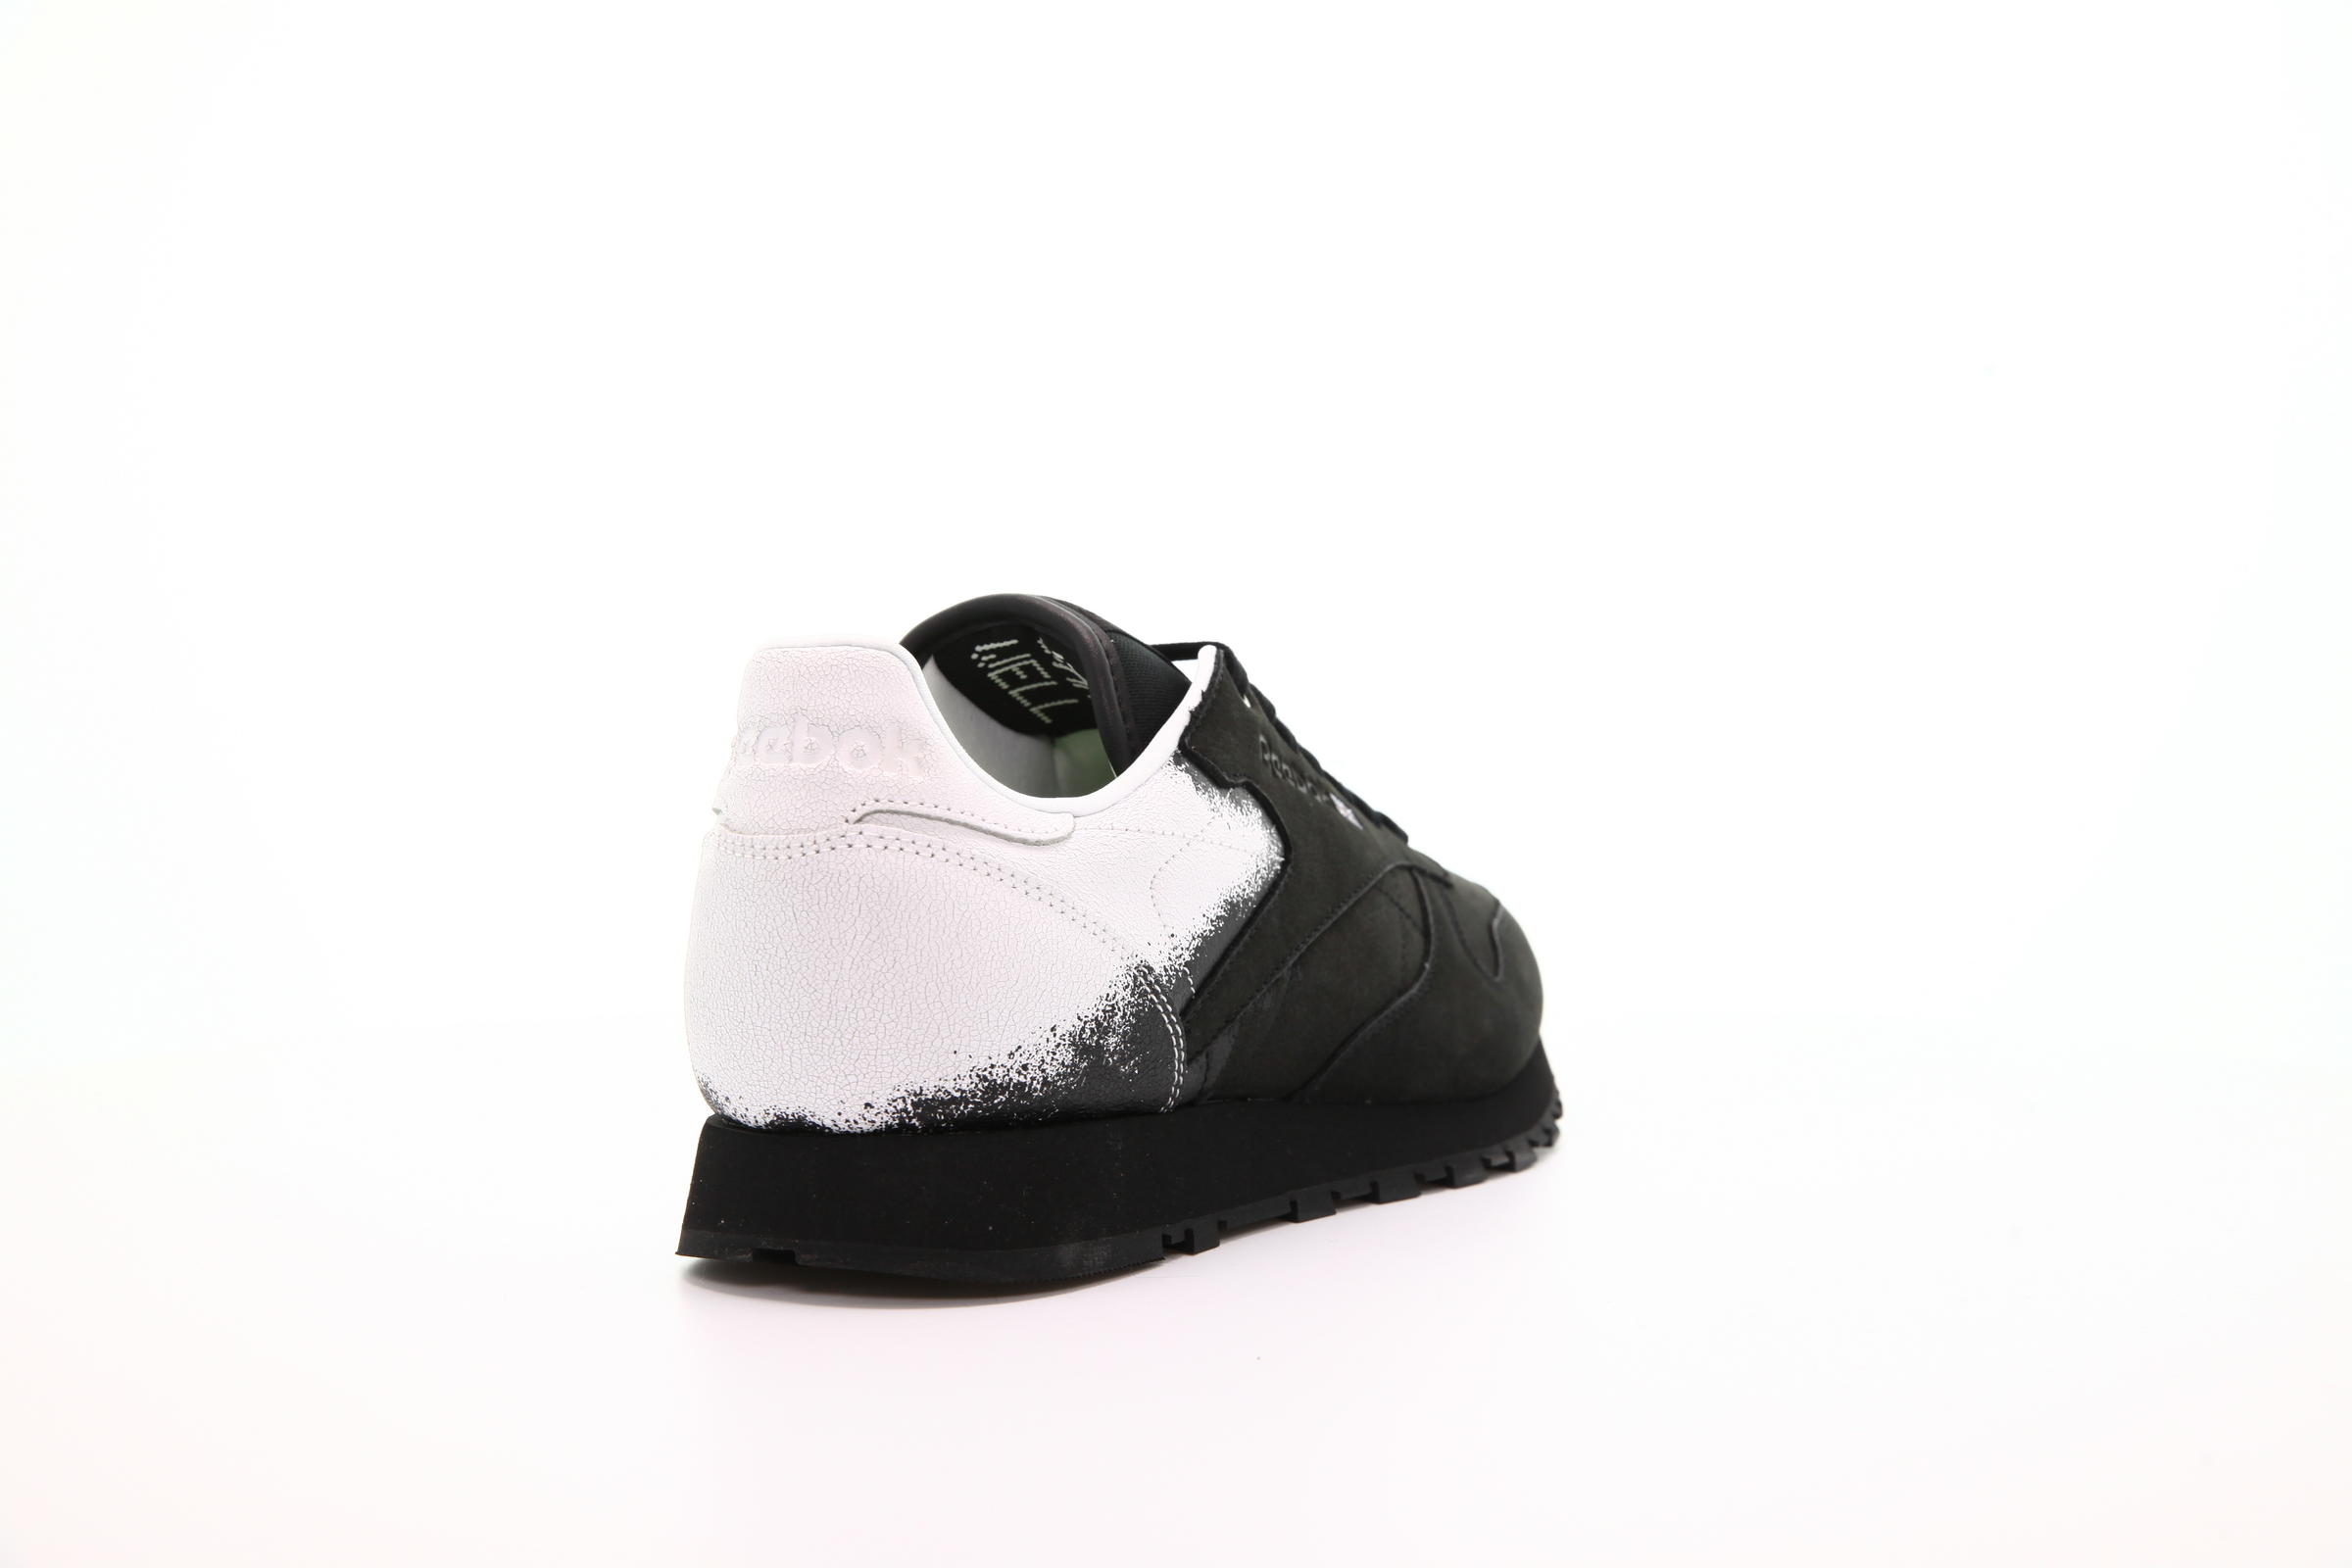 Reebok Classic Leather x Montana Cans "Black"